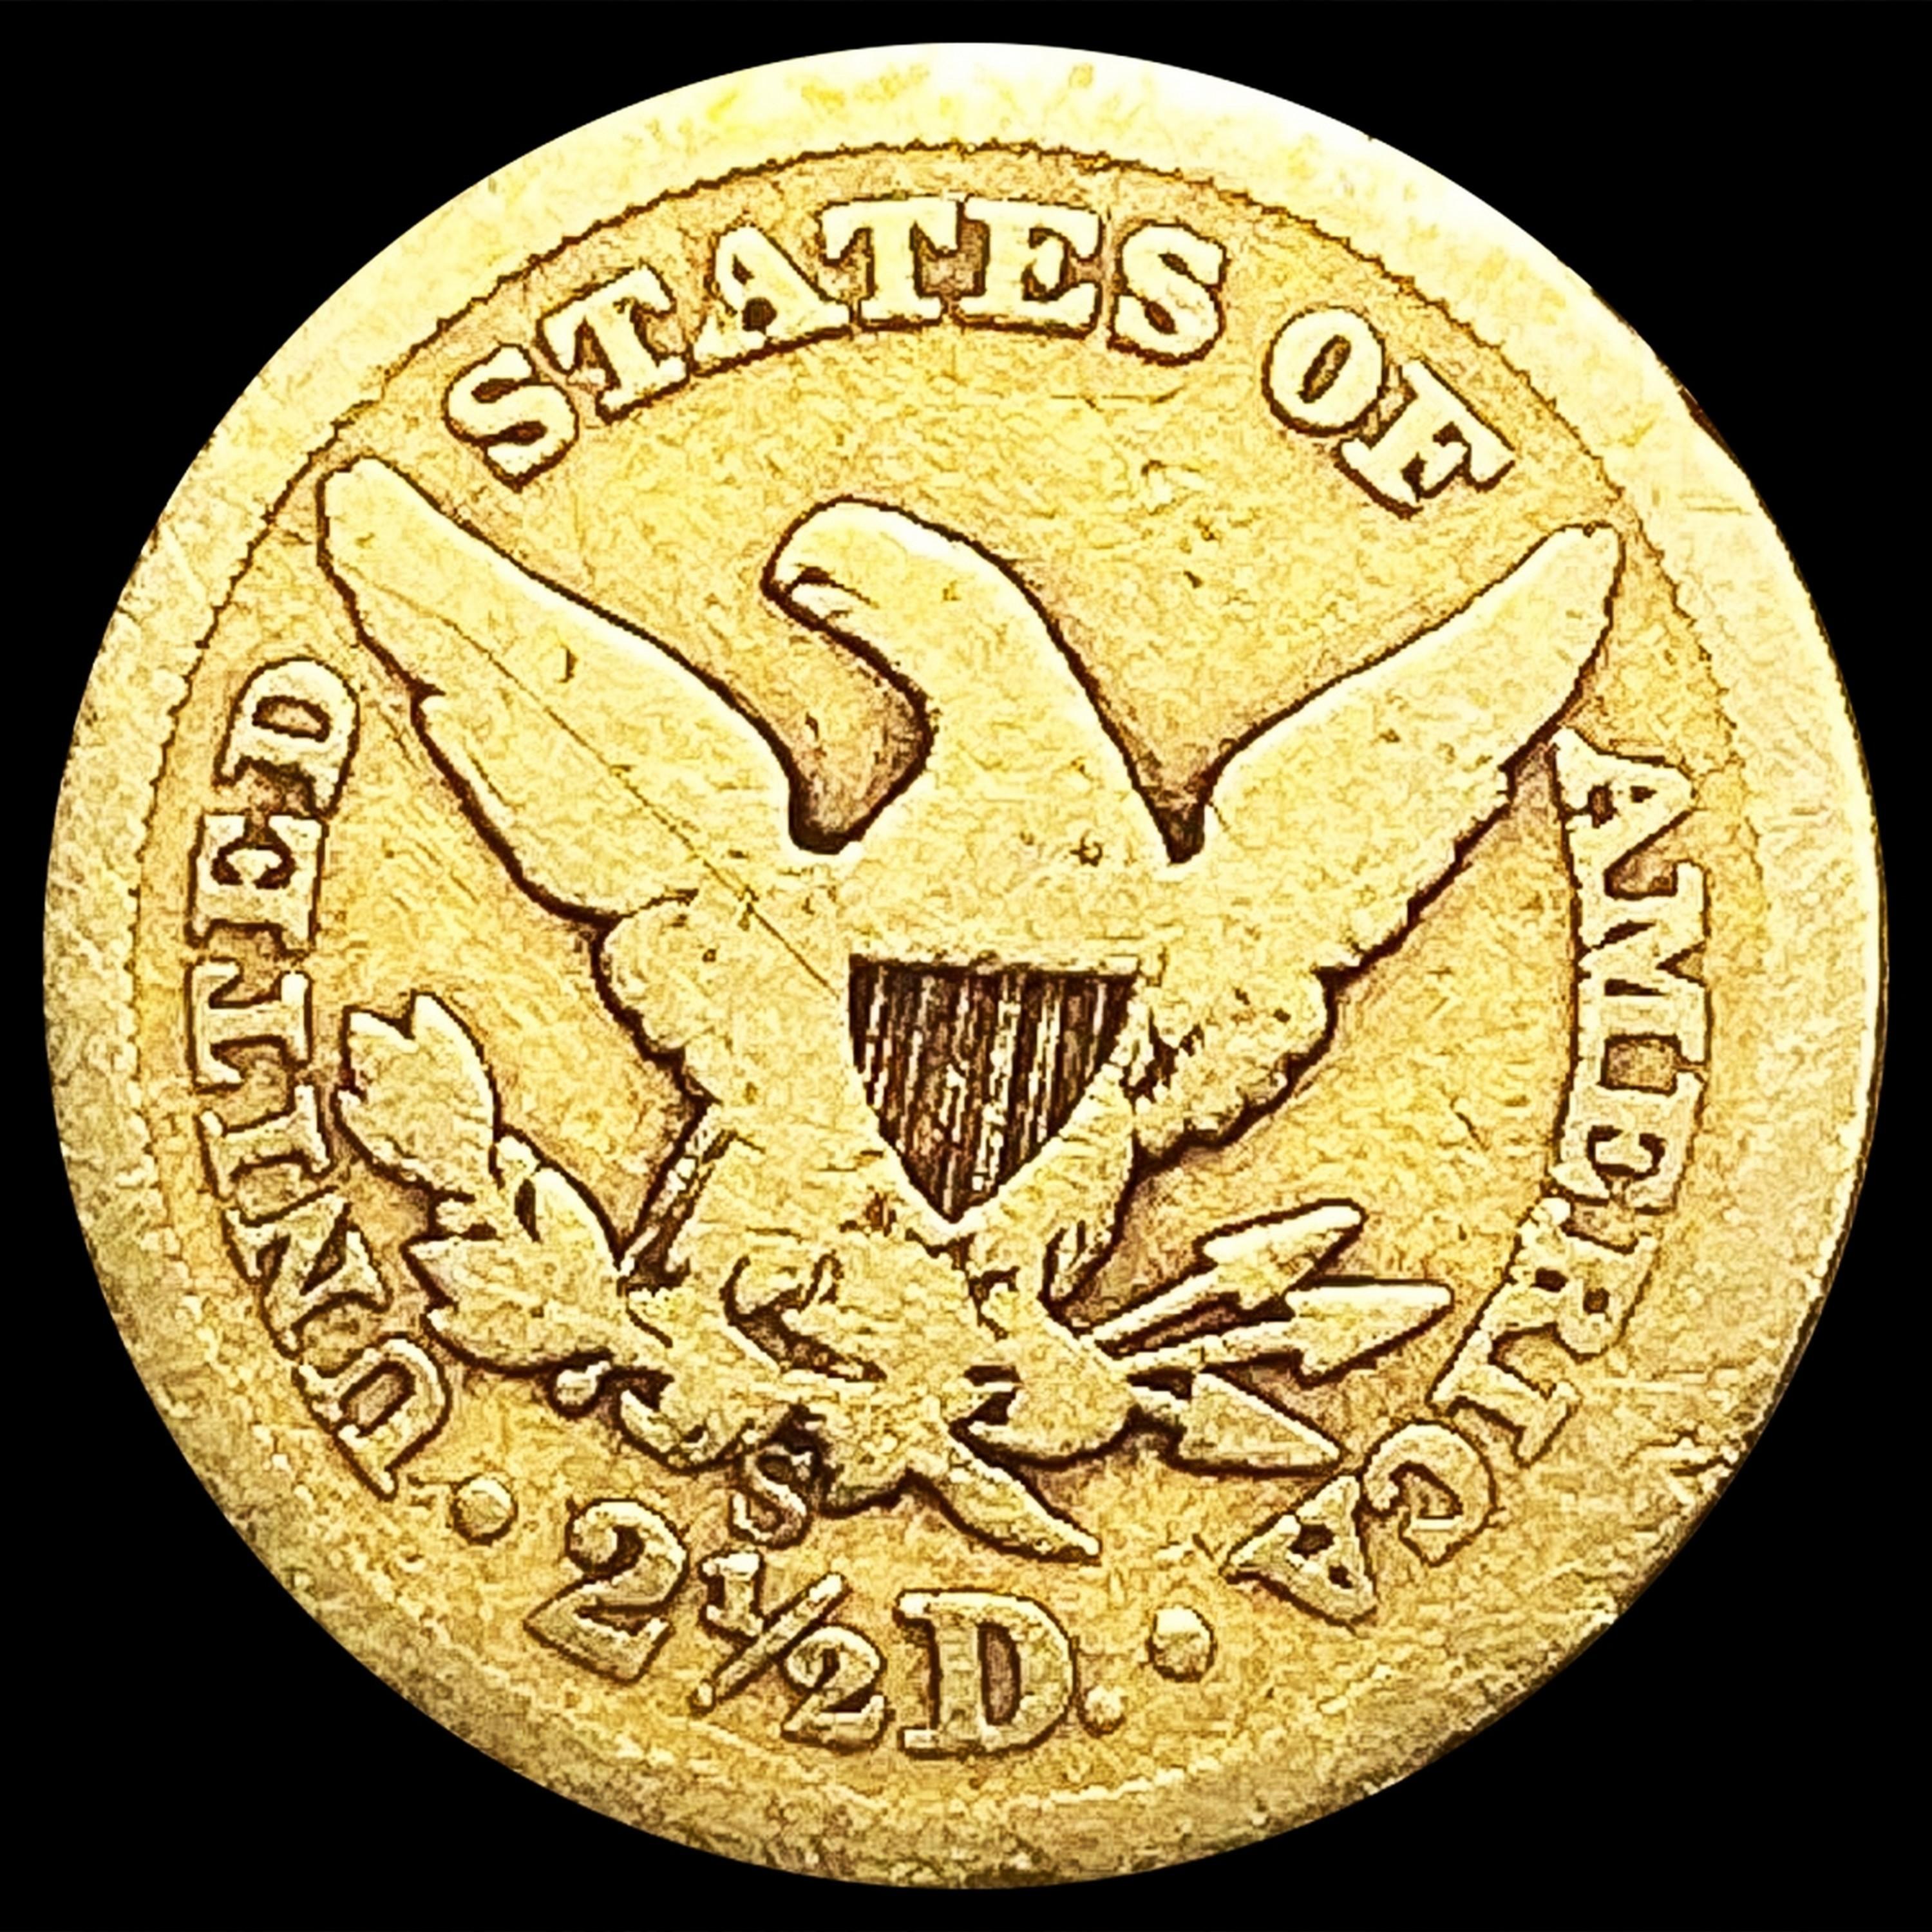 1857-S $2.50 Gold Quarter Eagle NICELY CIRCULATED